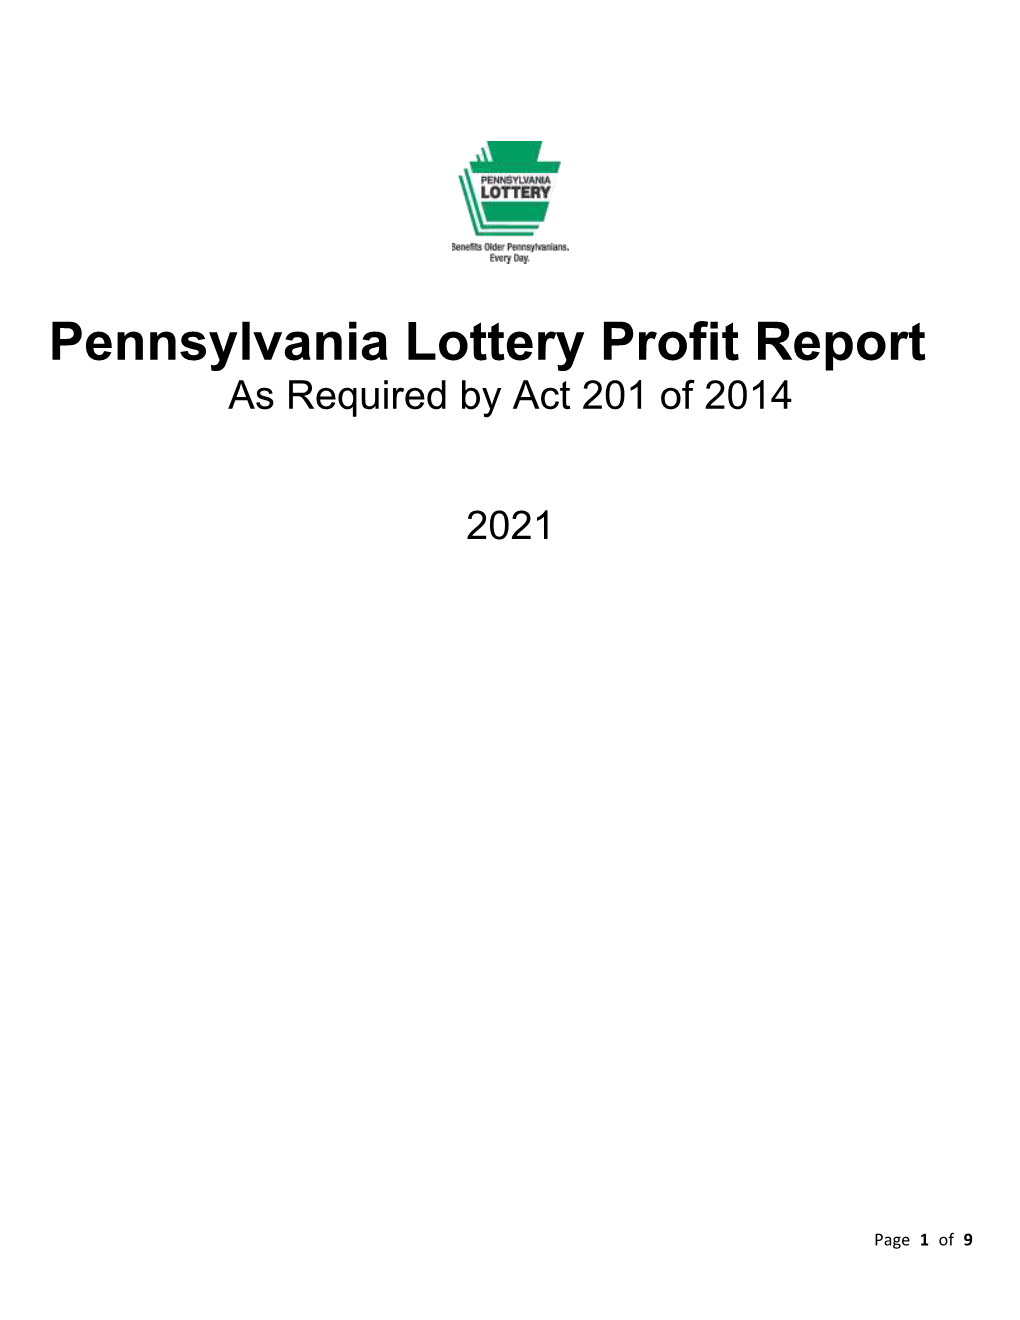 Pennsylvania Lottery Profit Report As Required by Act 201 of 2014